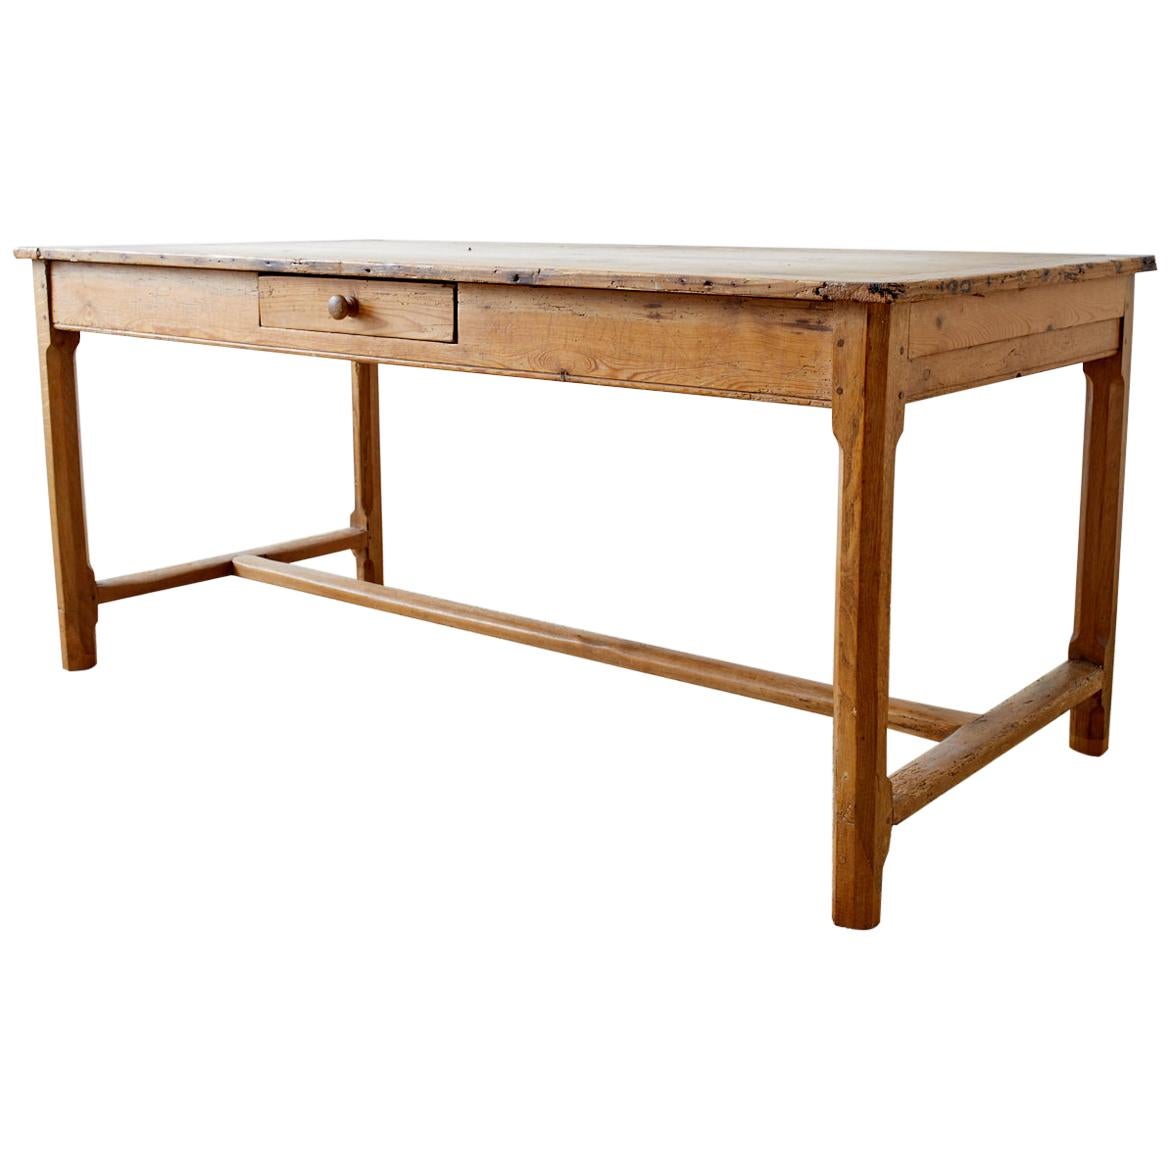 19th Century American Pine Farmhouse Dining or Writing Table